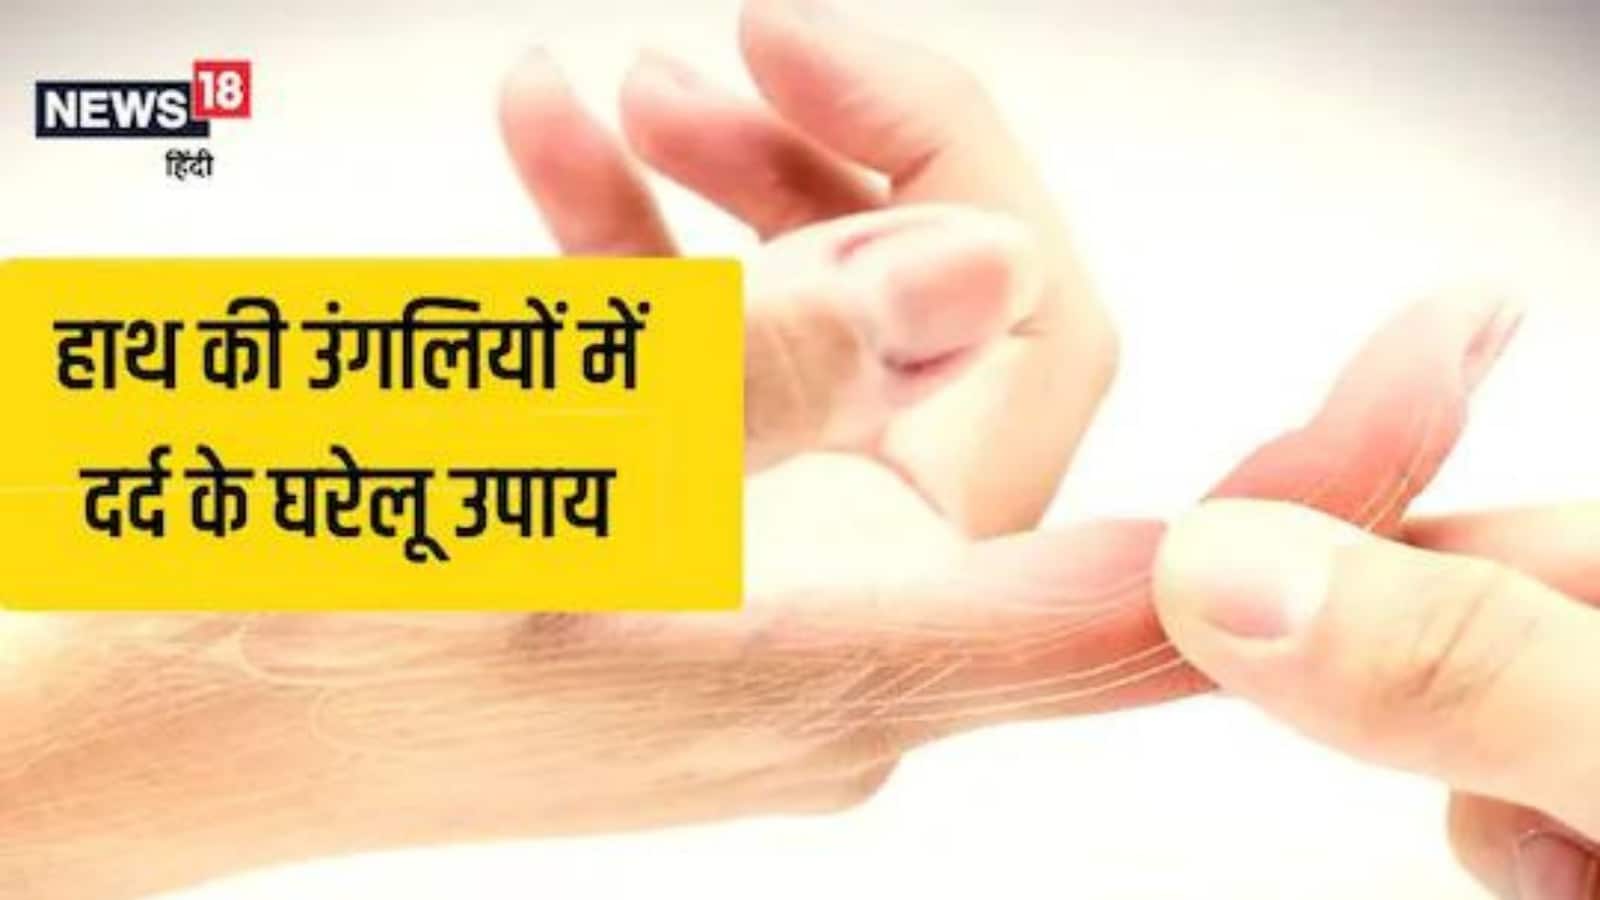 Finger Pain and Swelling? These Easy Home Remedies Can Bring Lots of Relief